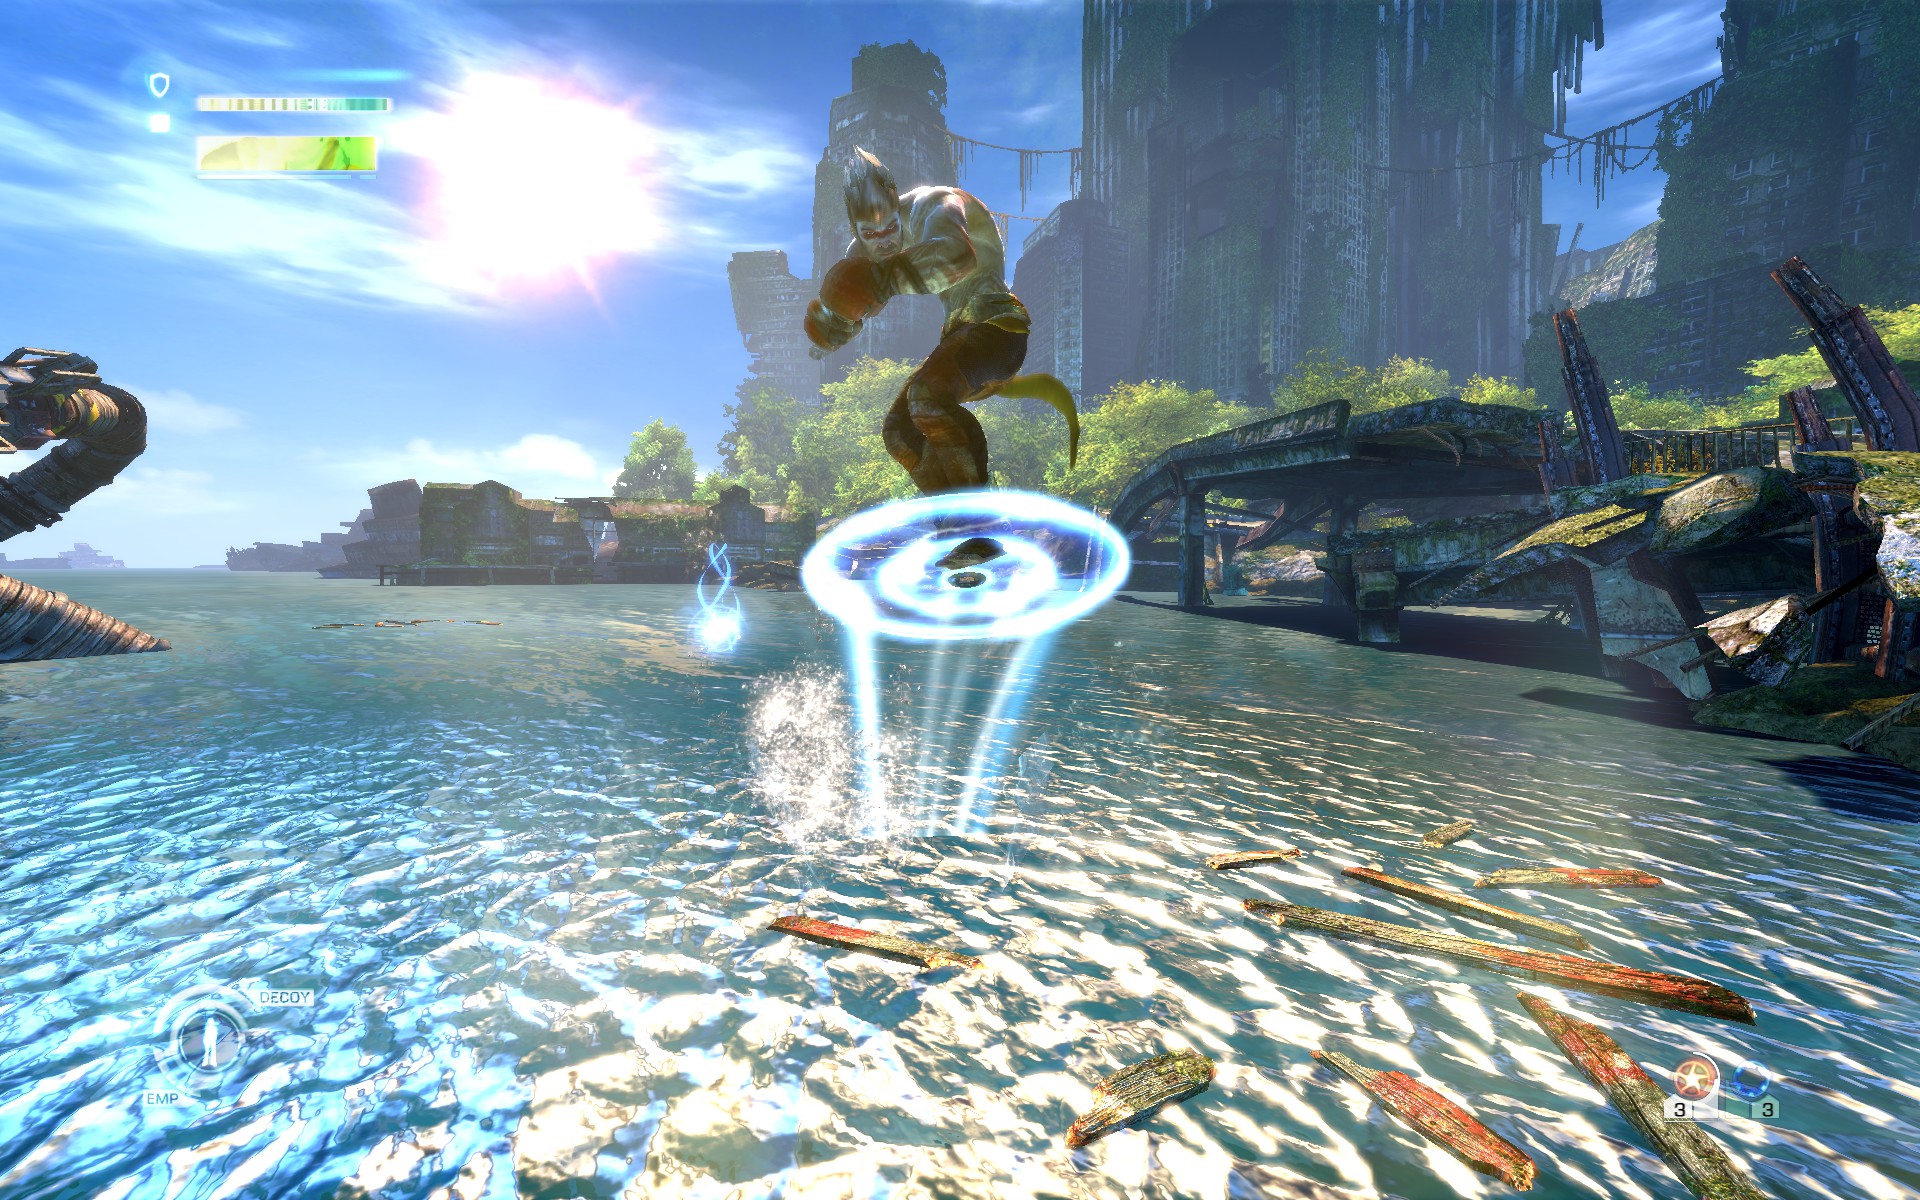 download free enslaved odyssey to the west premium edition